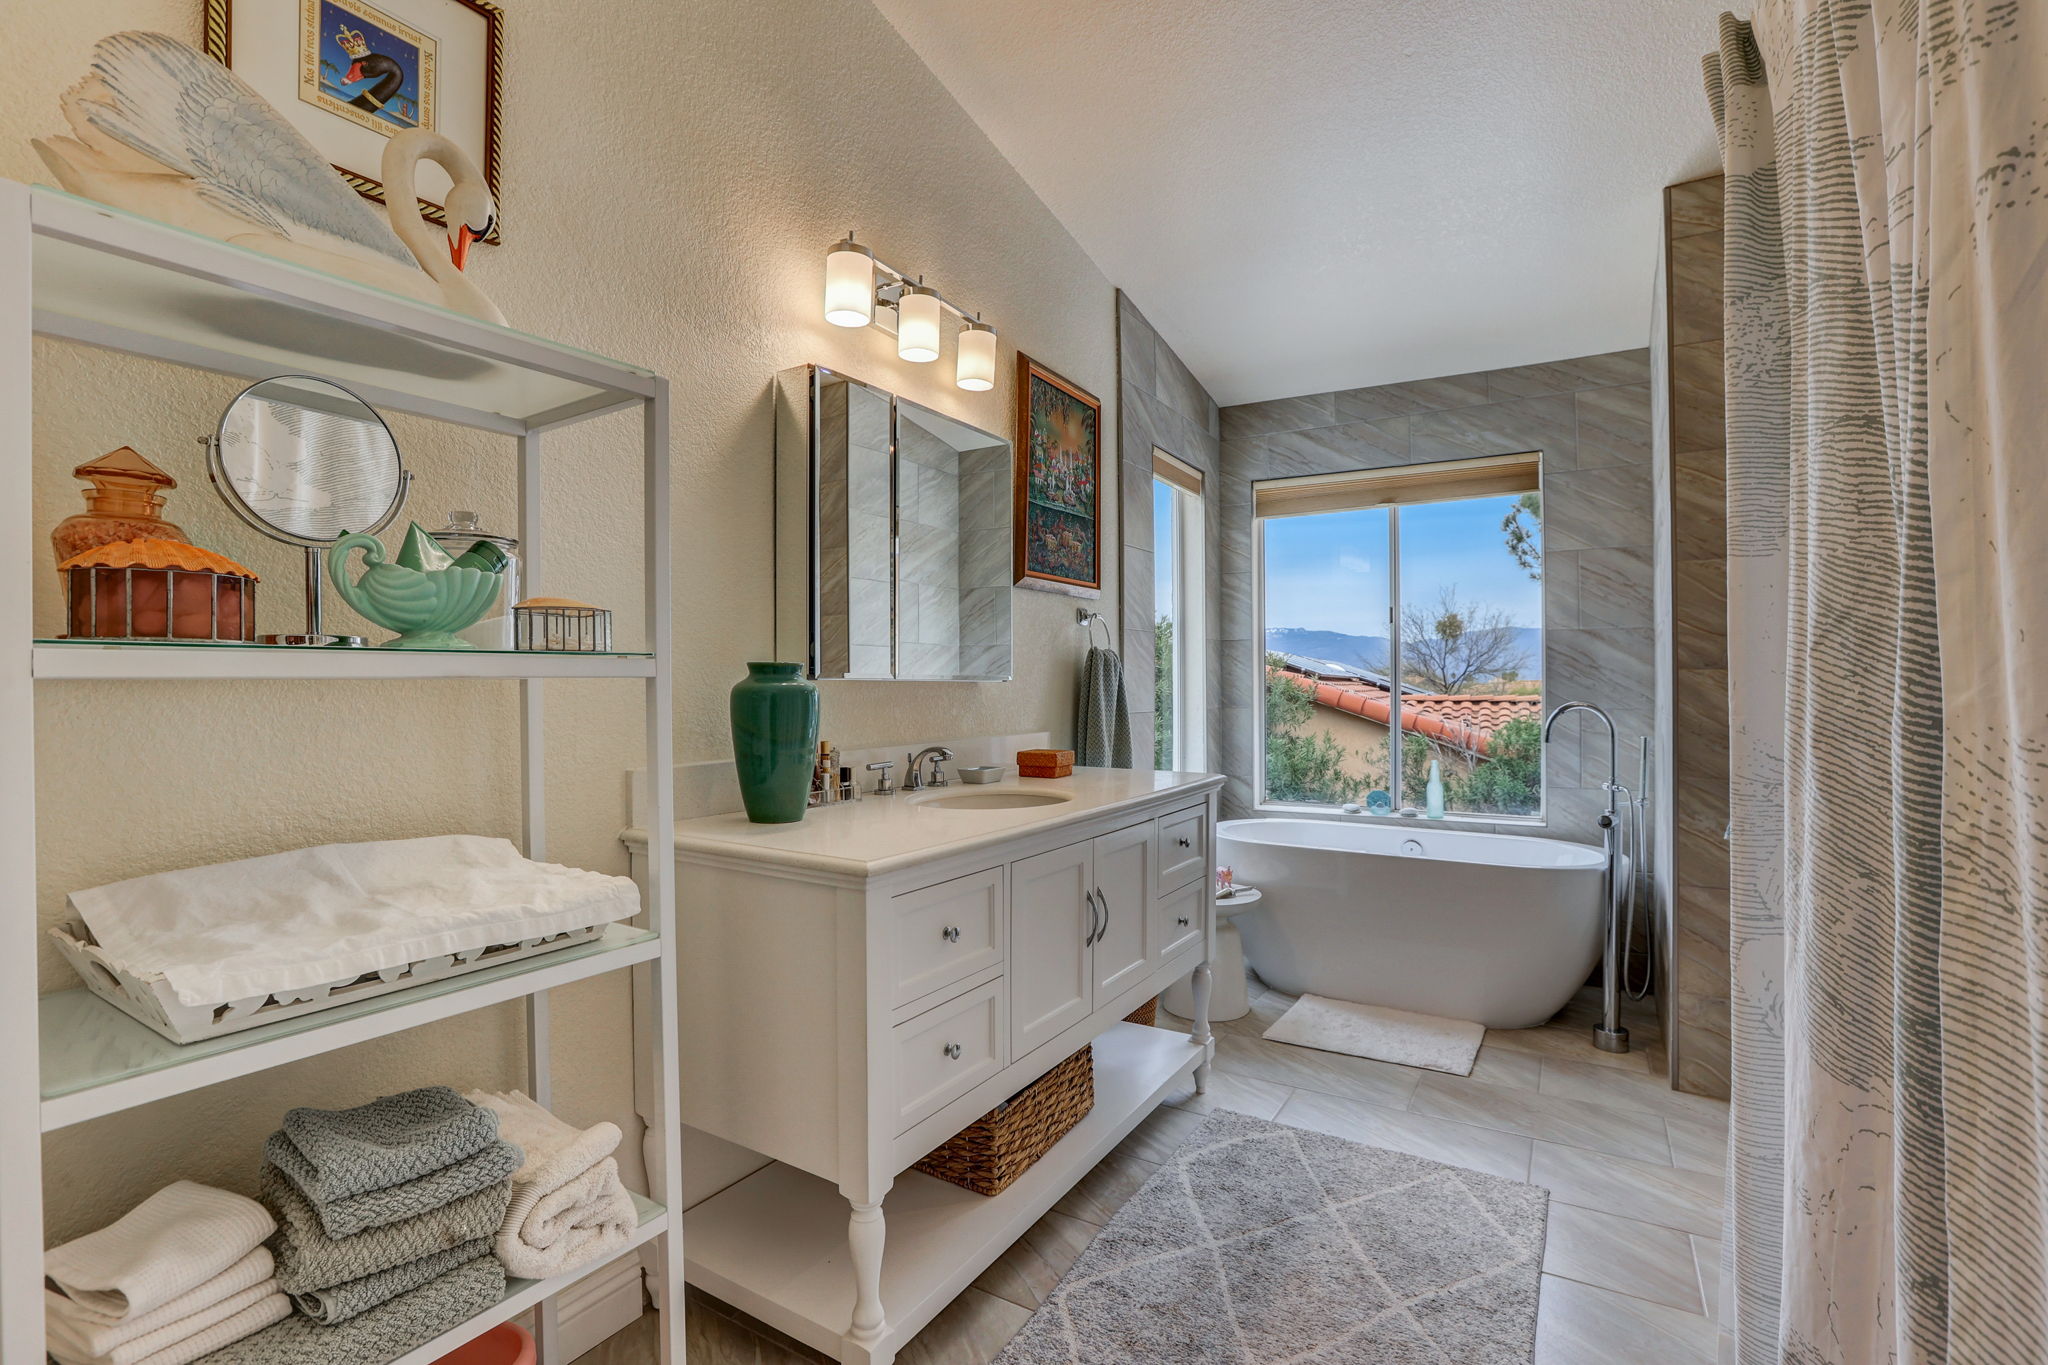 Primary Ensuite fully remodeled with walk-in closet and Emser tile.